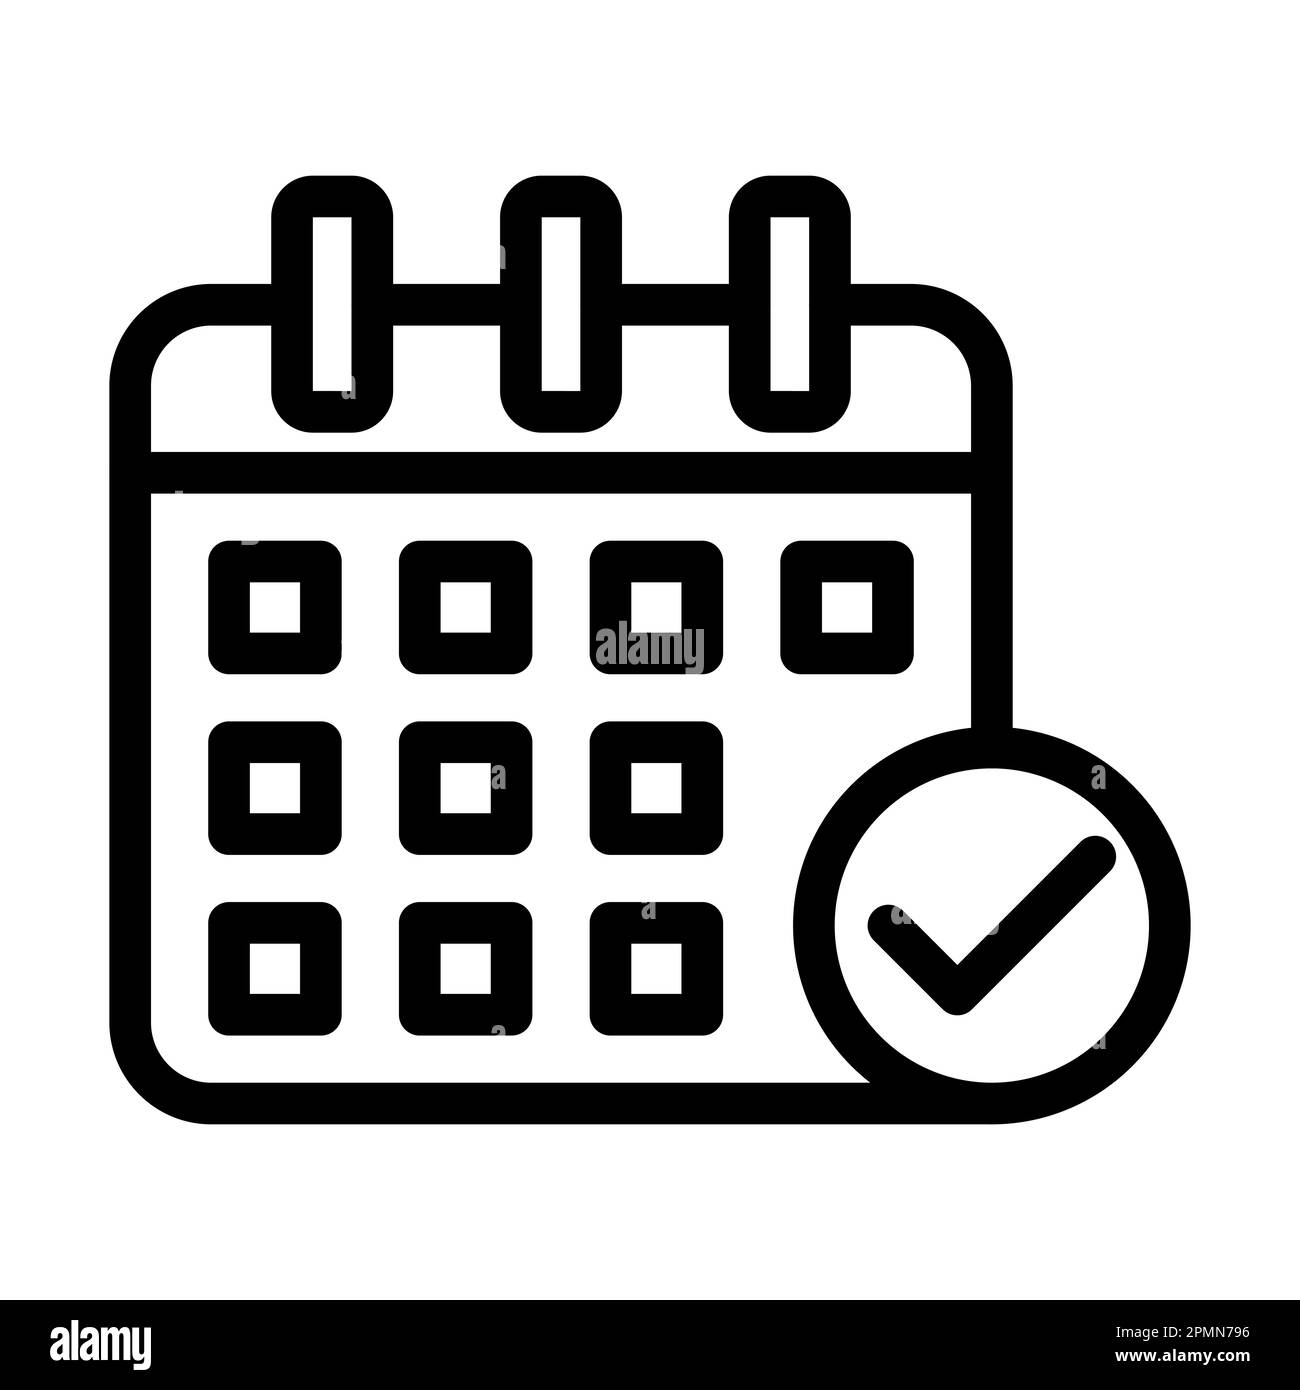 Schedule Vector Thick Line Icon For Personal And Commercial Use. Stock Photo